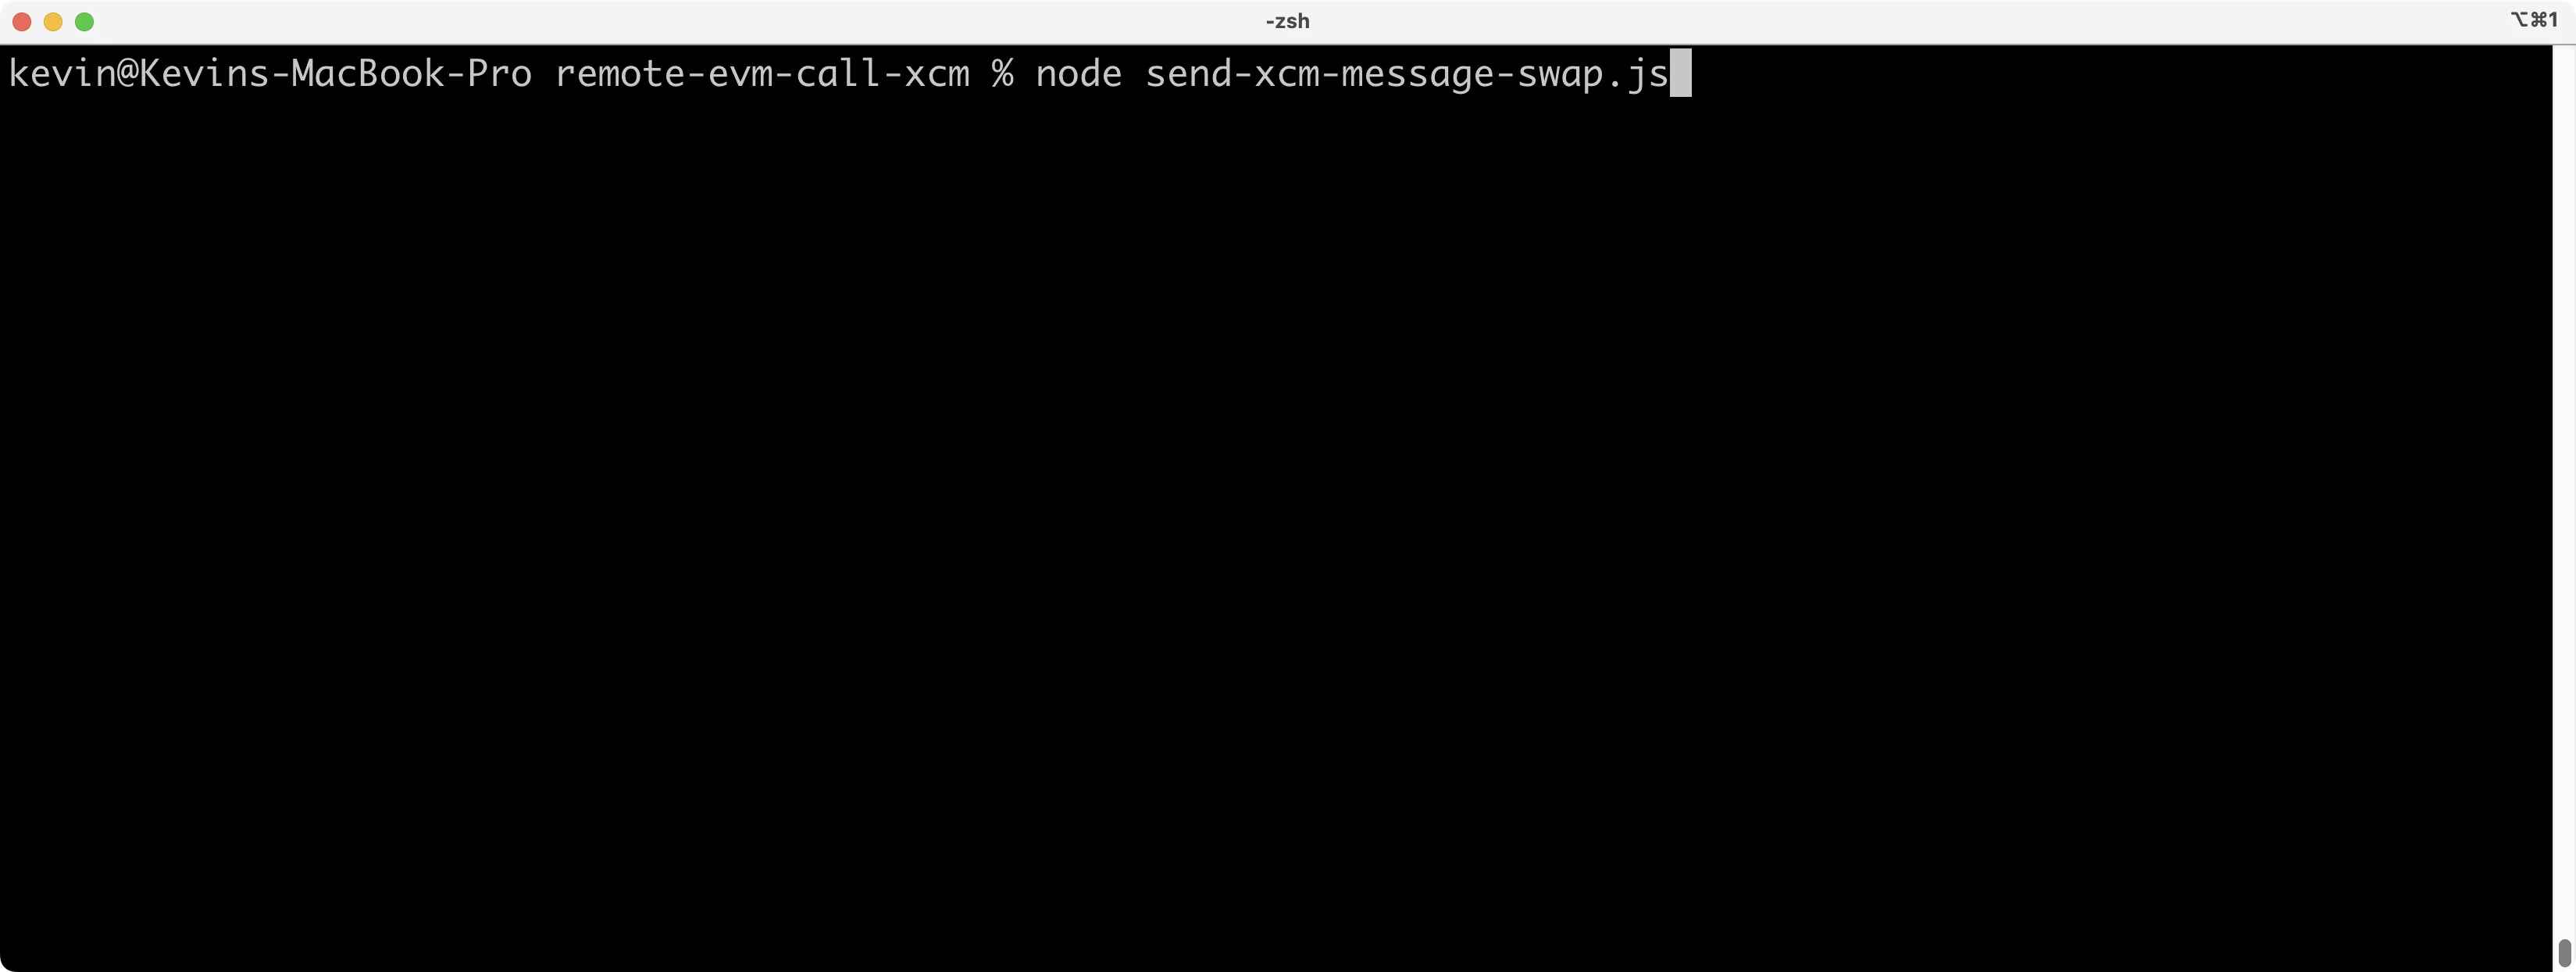 Sending the XCM message from the Relay Chain to Moonbase Alpha for the Uniswap V2 swap